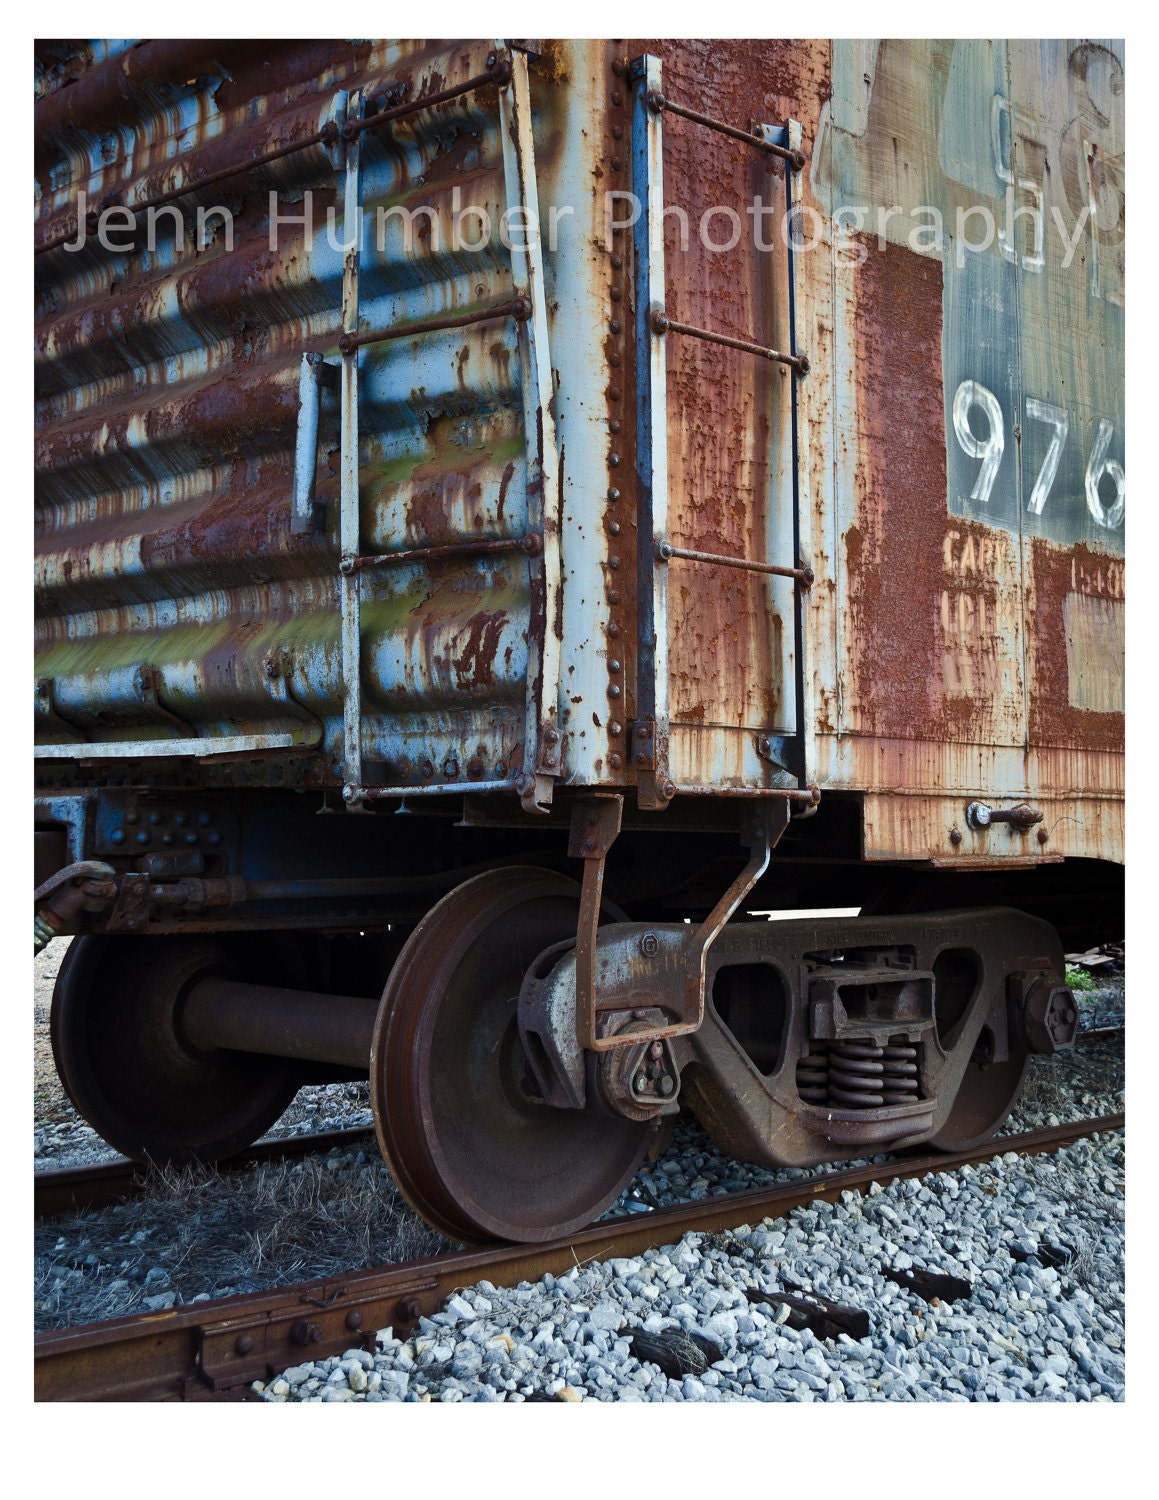 Rusted Railroad Car 8x10 Inch Color Photograph - jnnfrfrnk